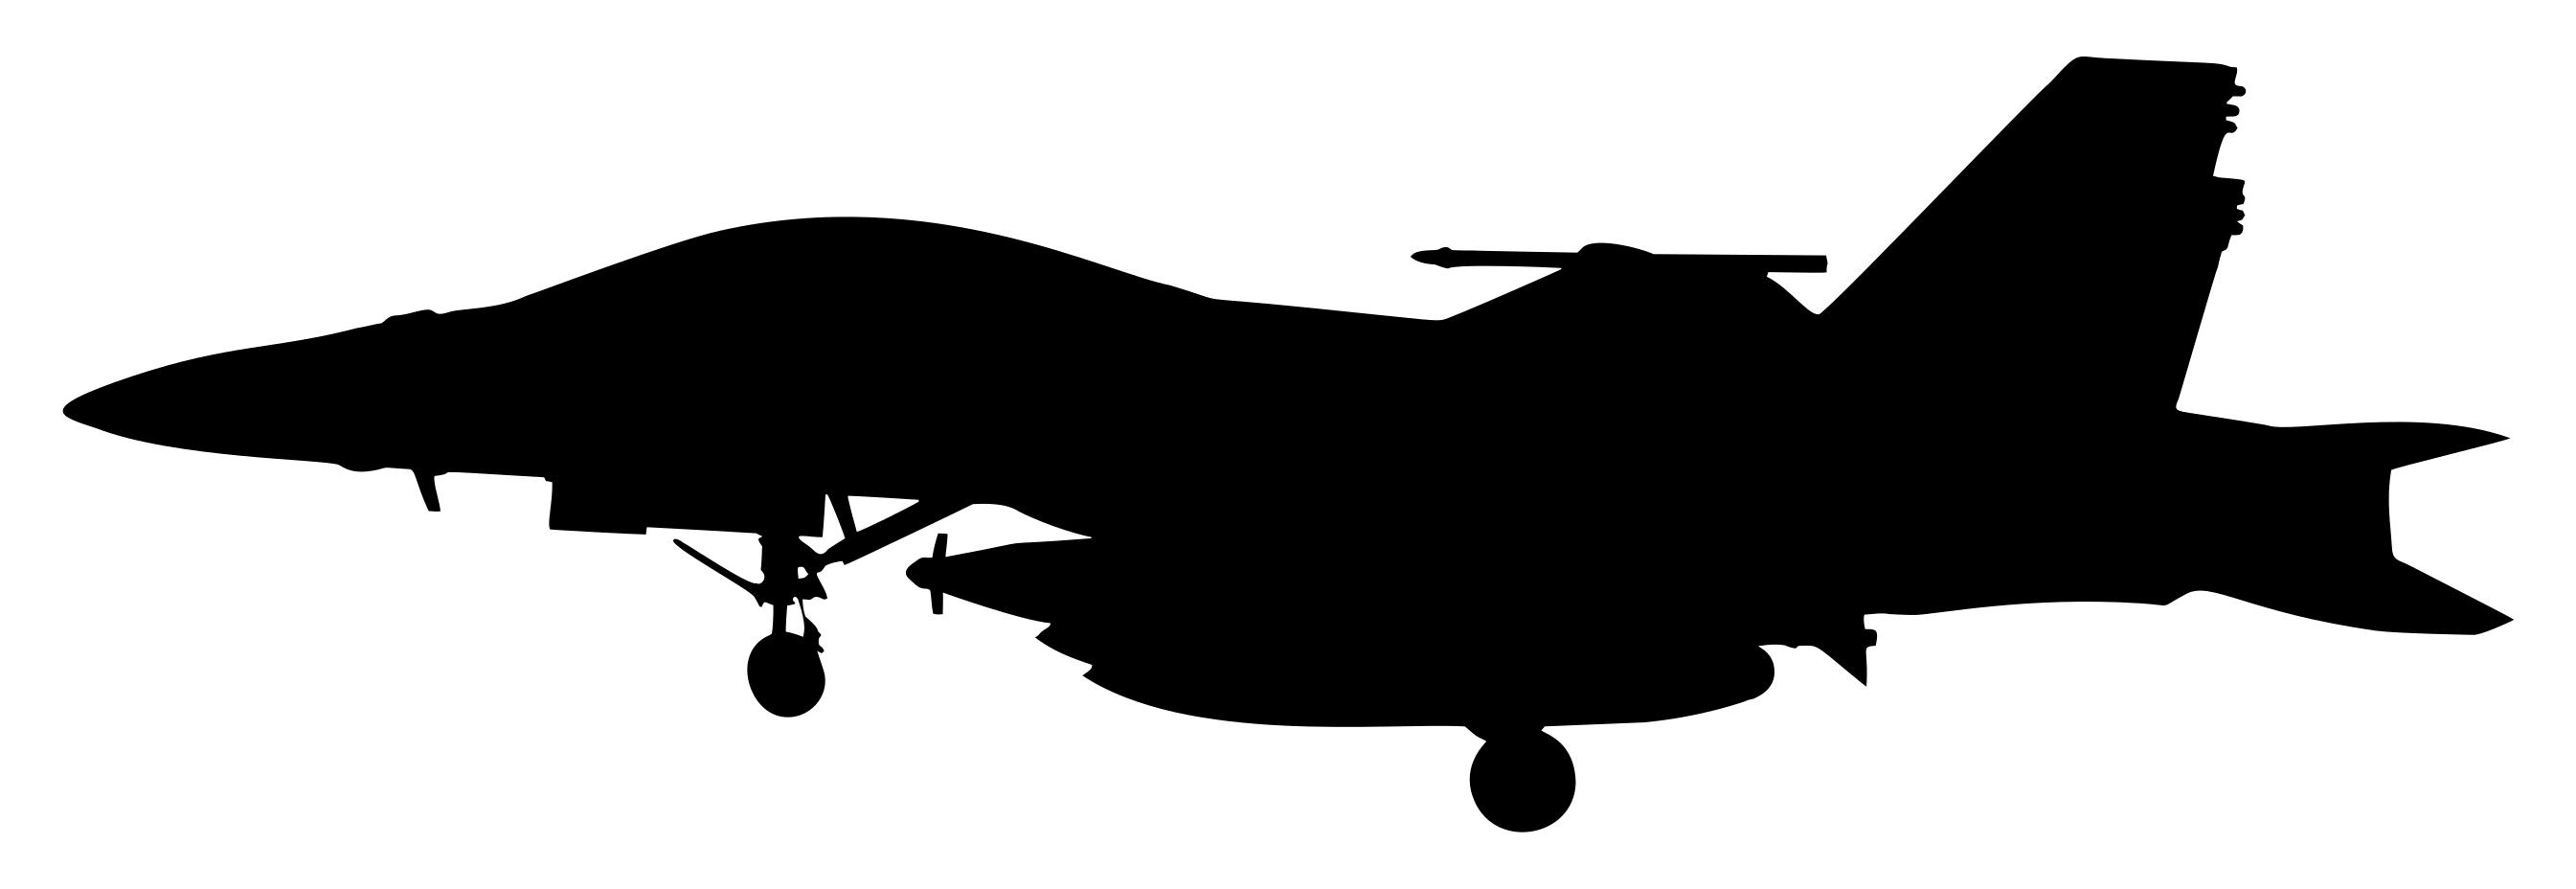 Fighter silhouette at getdrawings. Army clipart jet